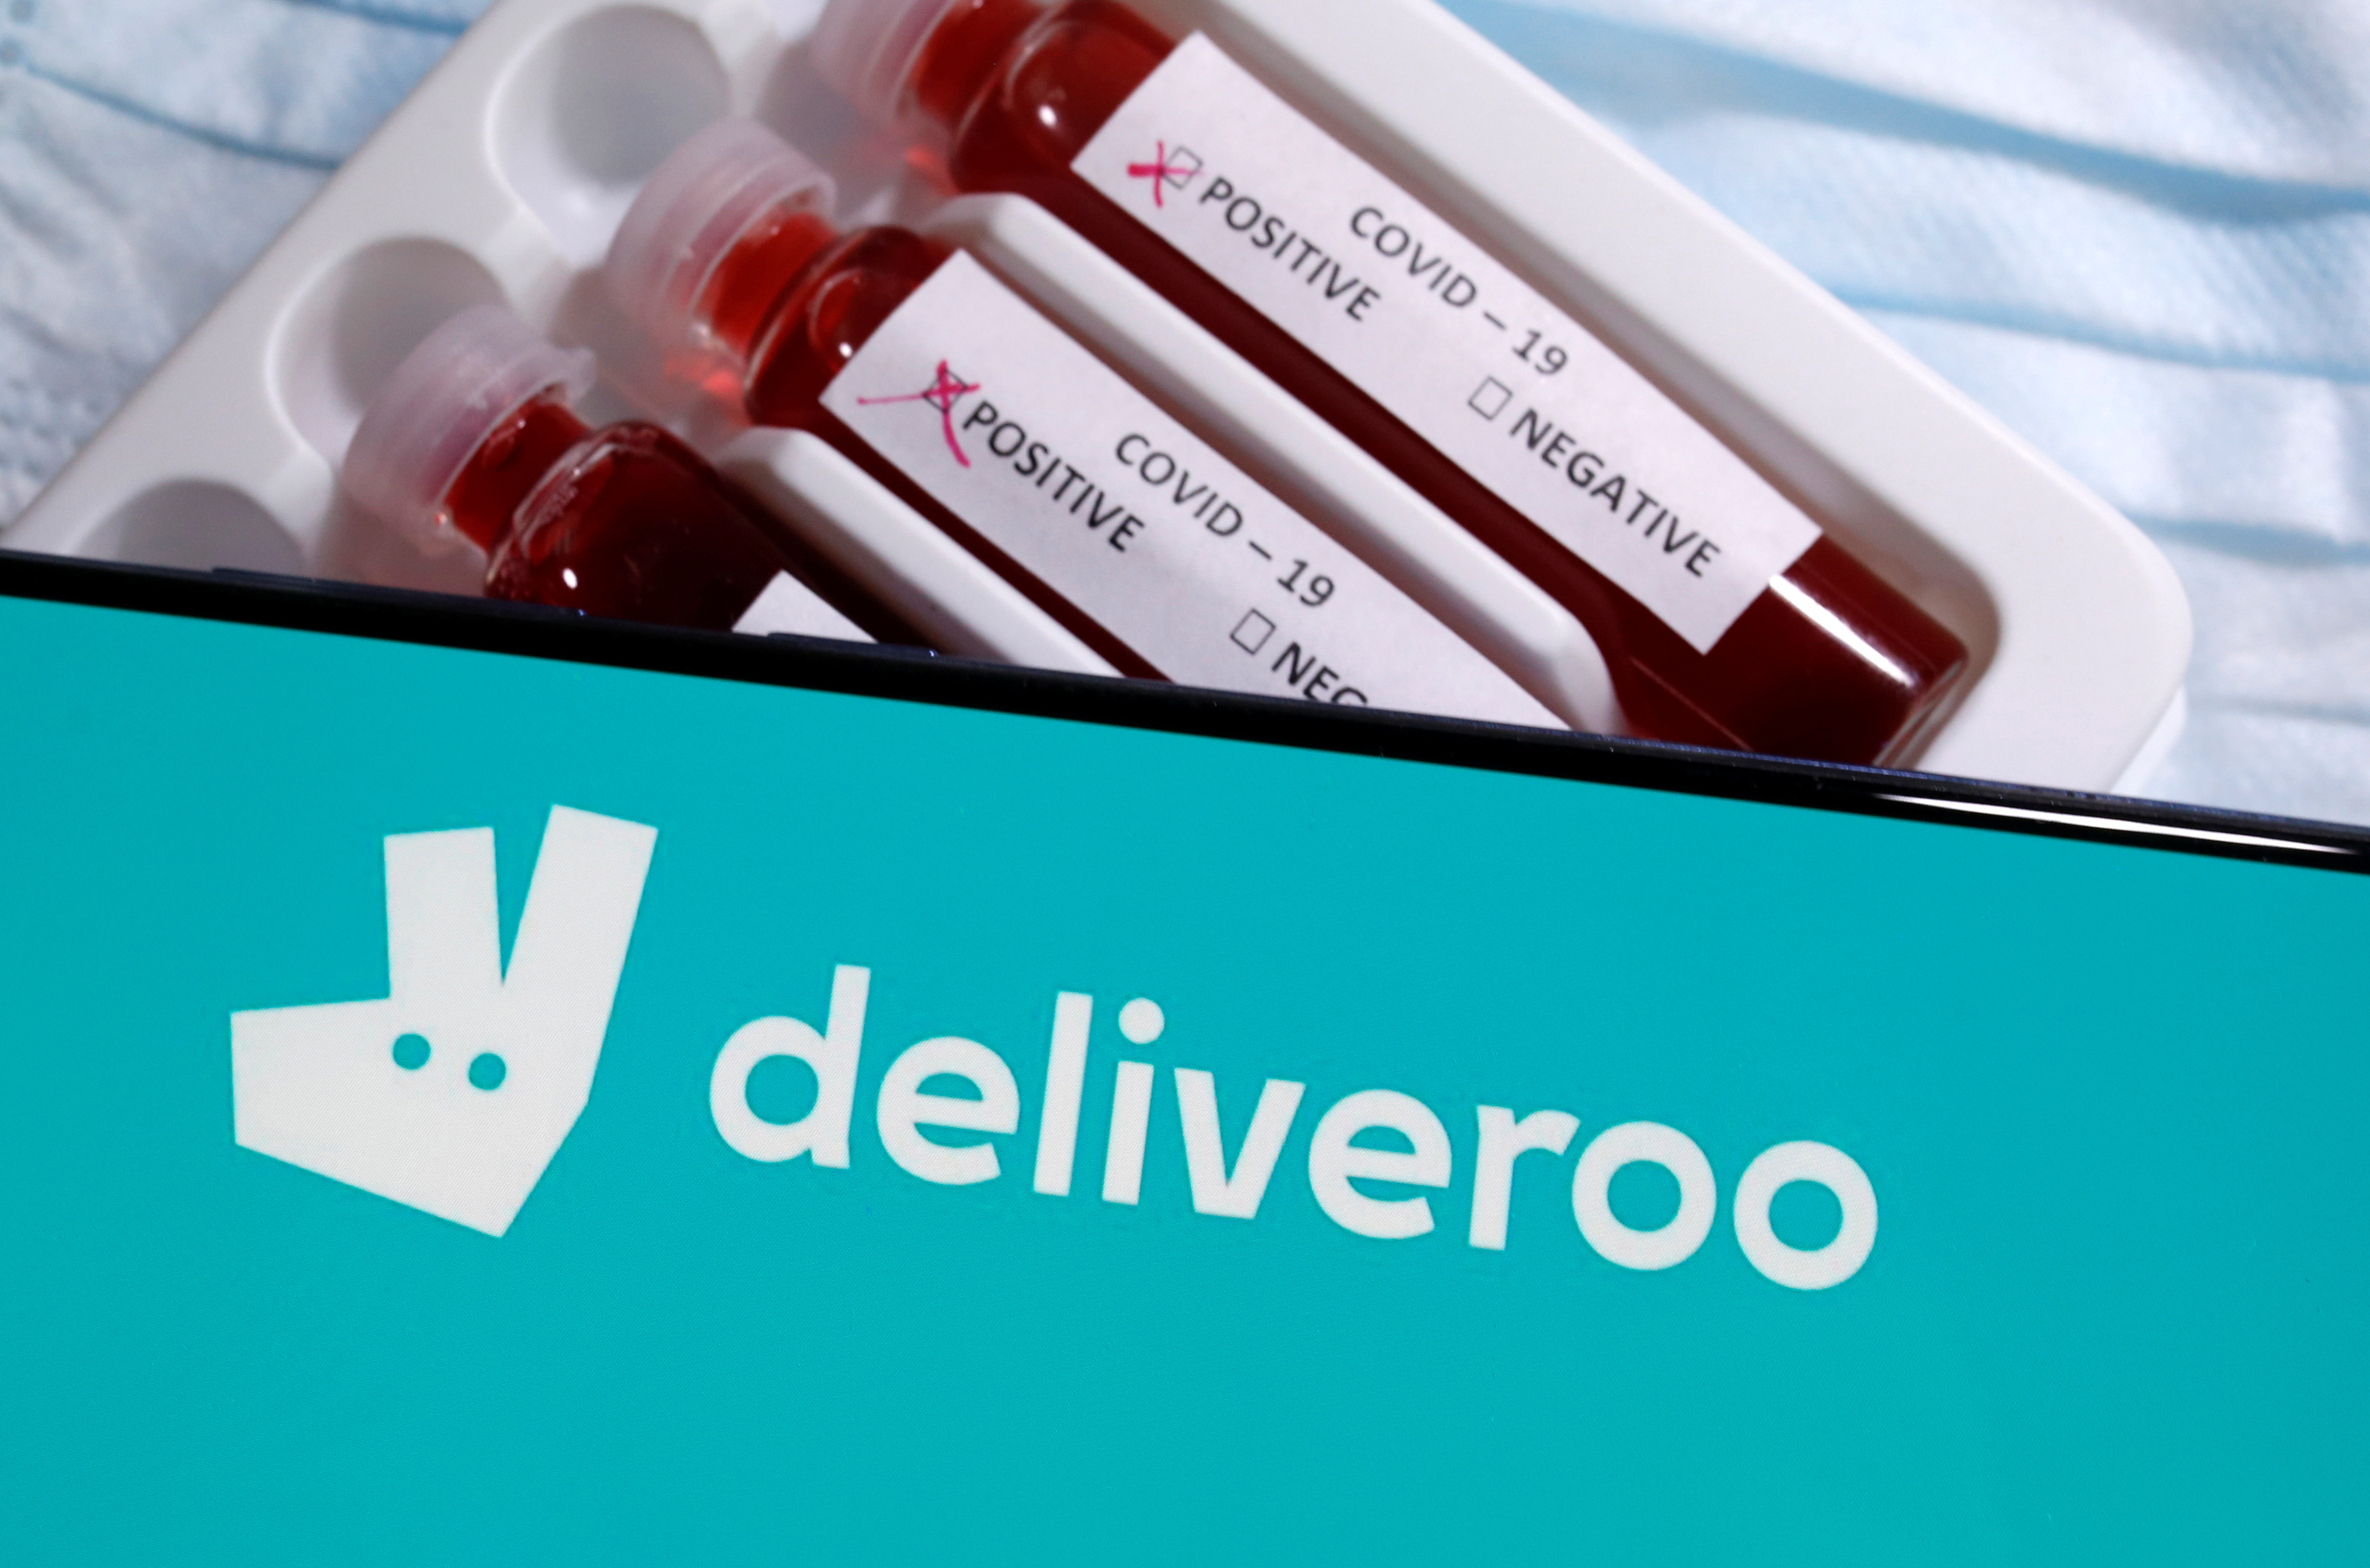 Smarphone with Deliveroo logo is placed on the test tubes labelled with the Coronavirus disease (COVID - 19) name in this illustration taken